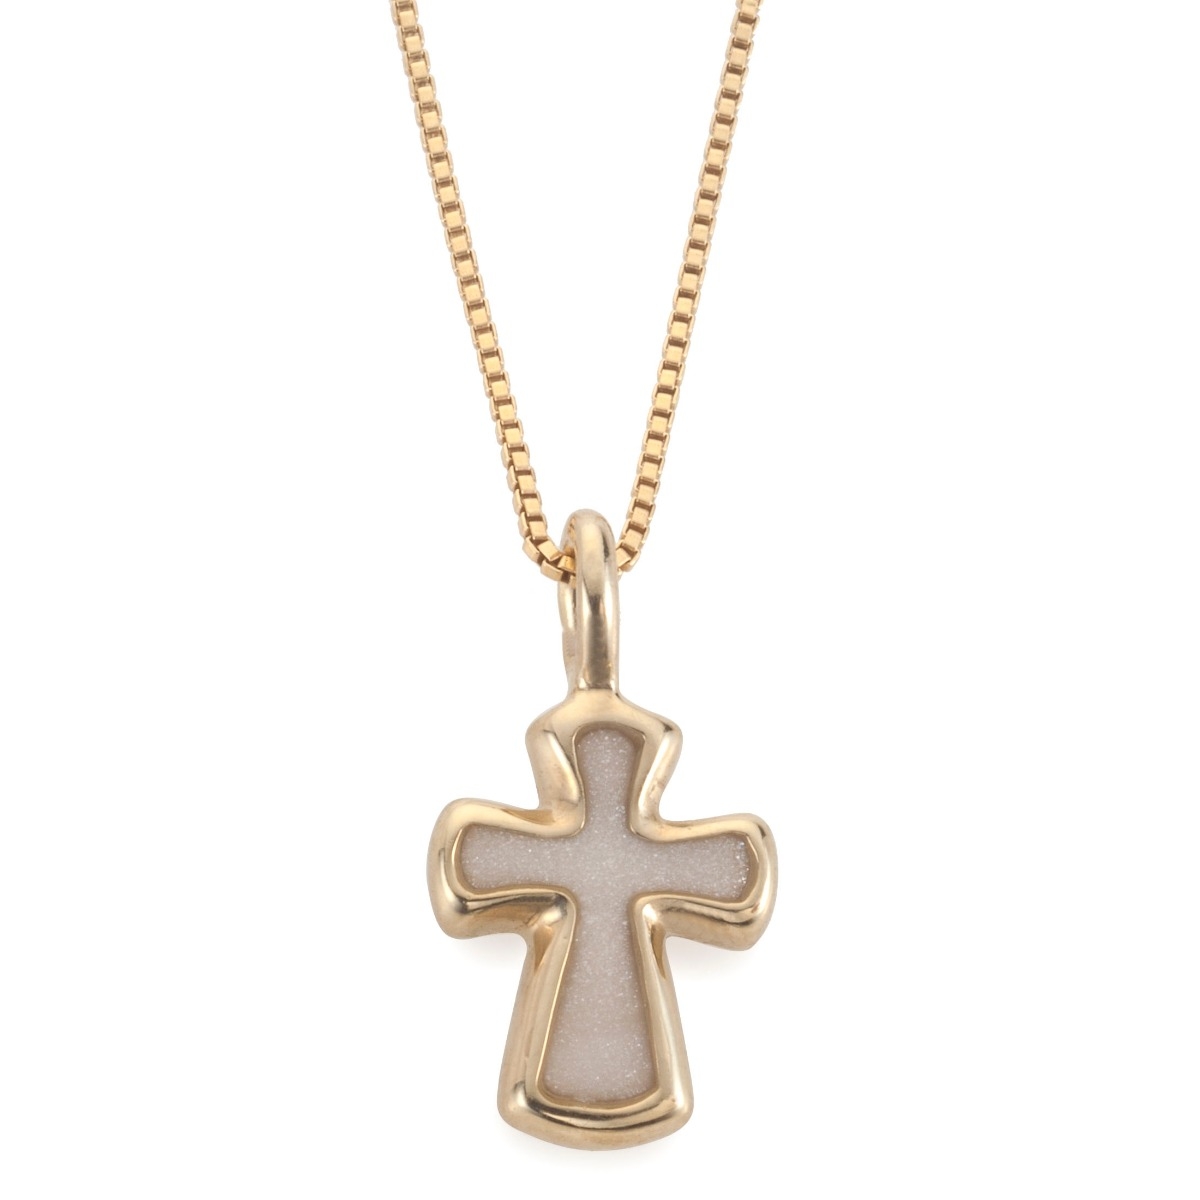 Adina Plastelina Gold Plated Cross Necklace (Mother of Pearl) - 1